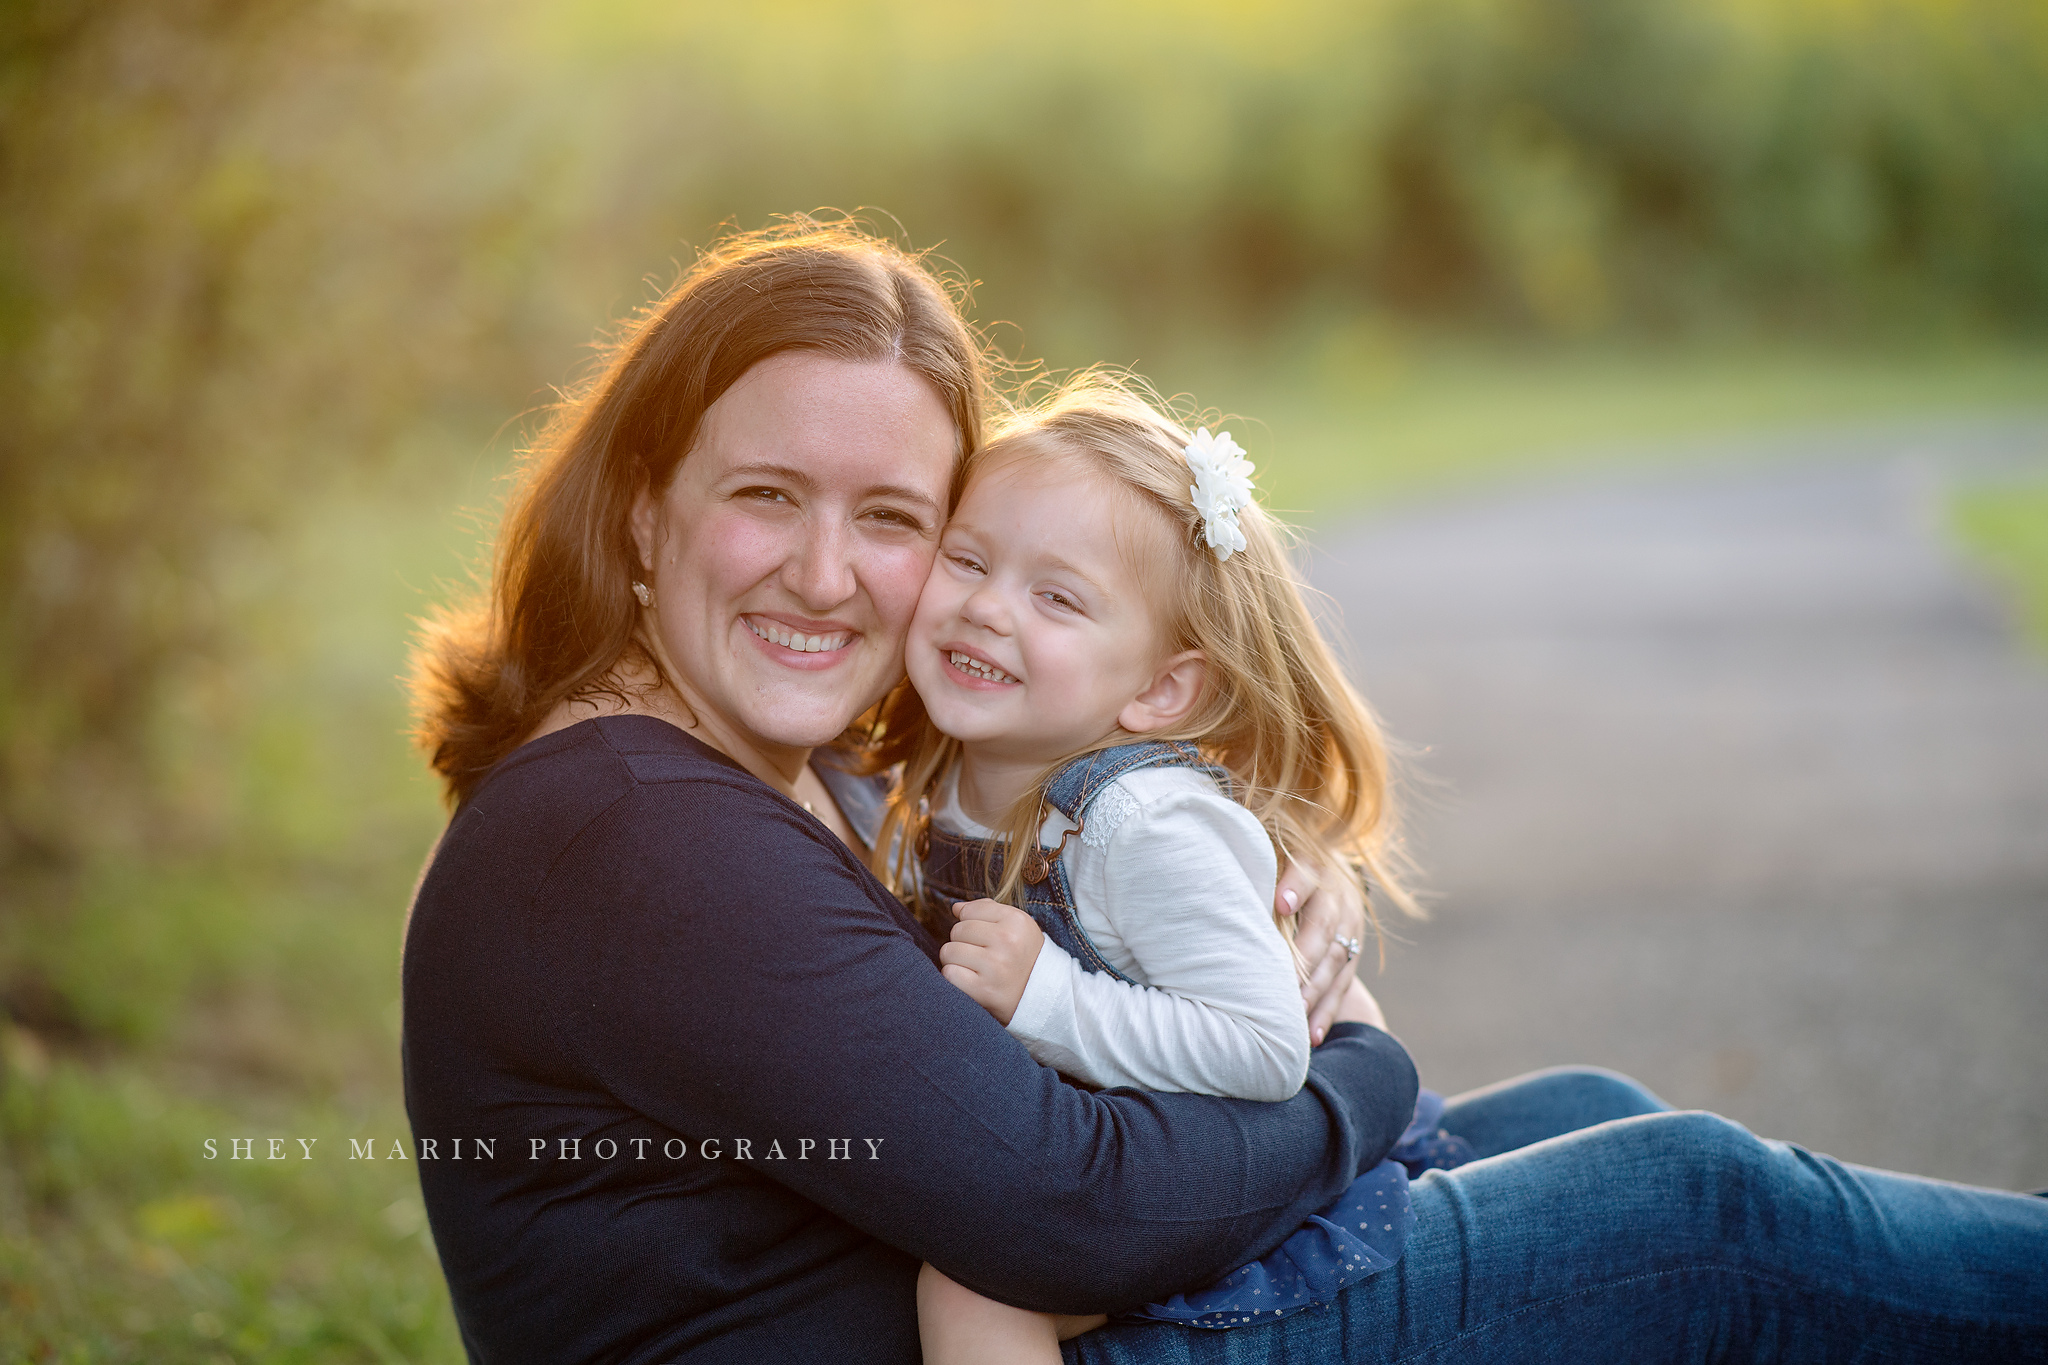 wildflowers and sisters Maryland family photographer